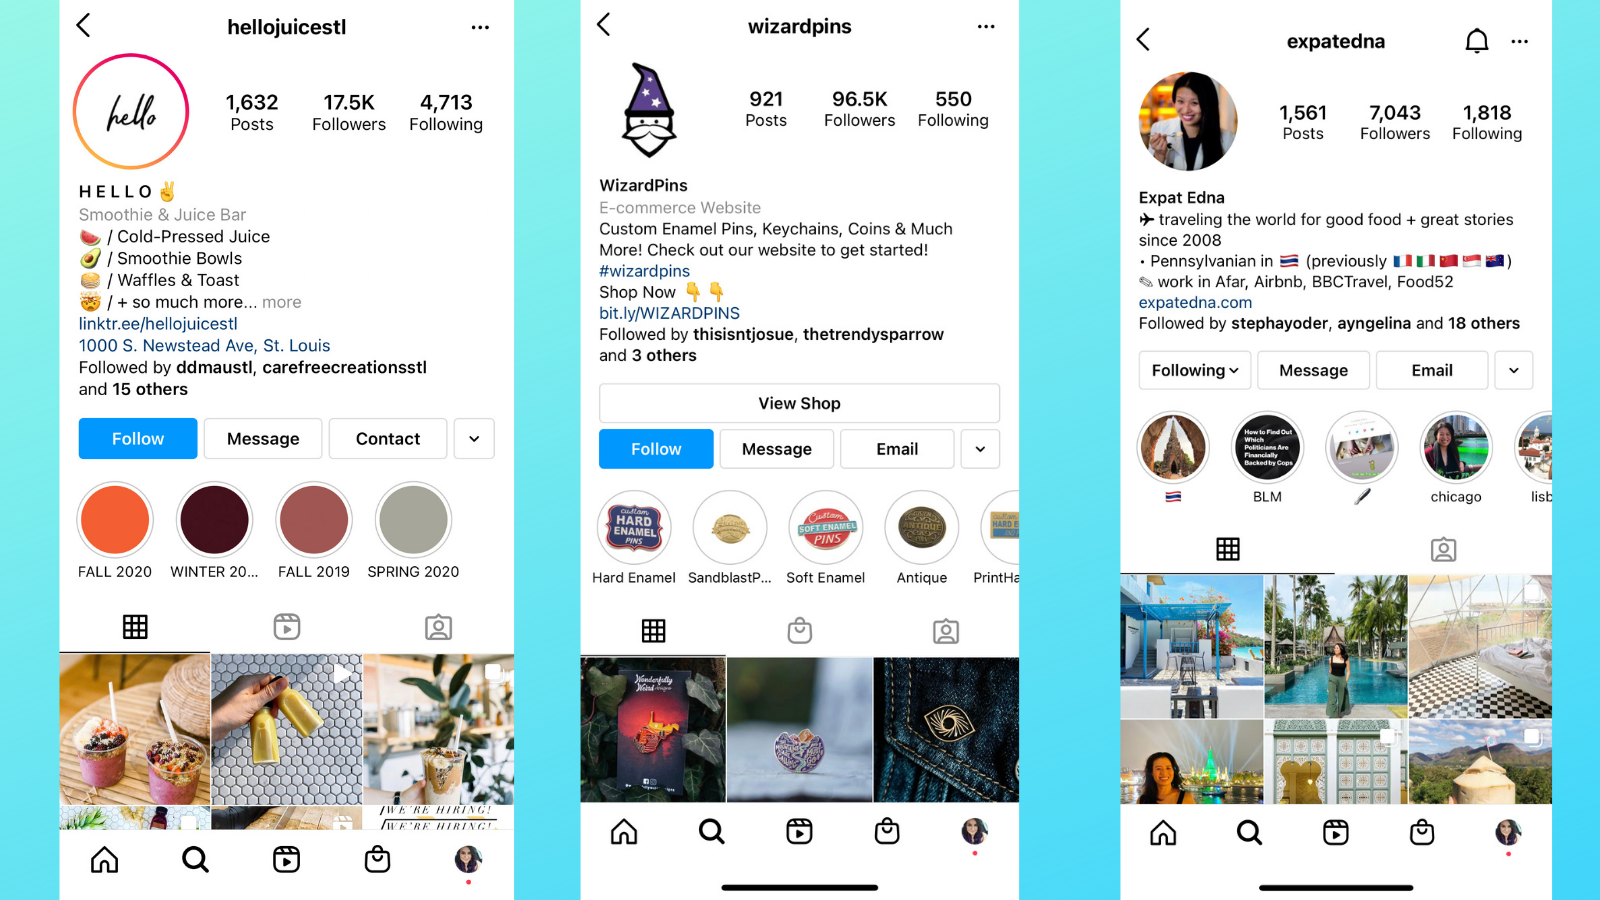 Emojis can liven up Instagram bios in many ways. Hello Juice pairs emojis with line breaks, Wizard Pins uses emojis as part of a call to action, and Expat Edna uses them to represent countries she has visited and actions such as “writing.” 